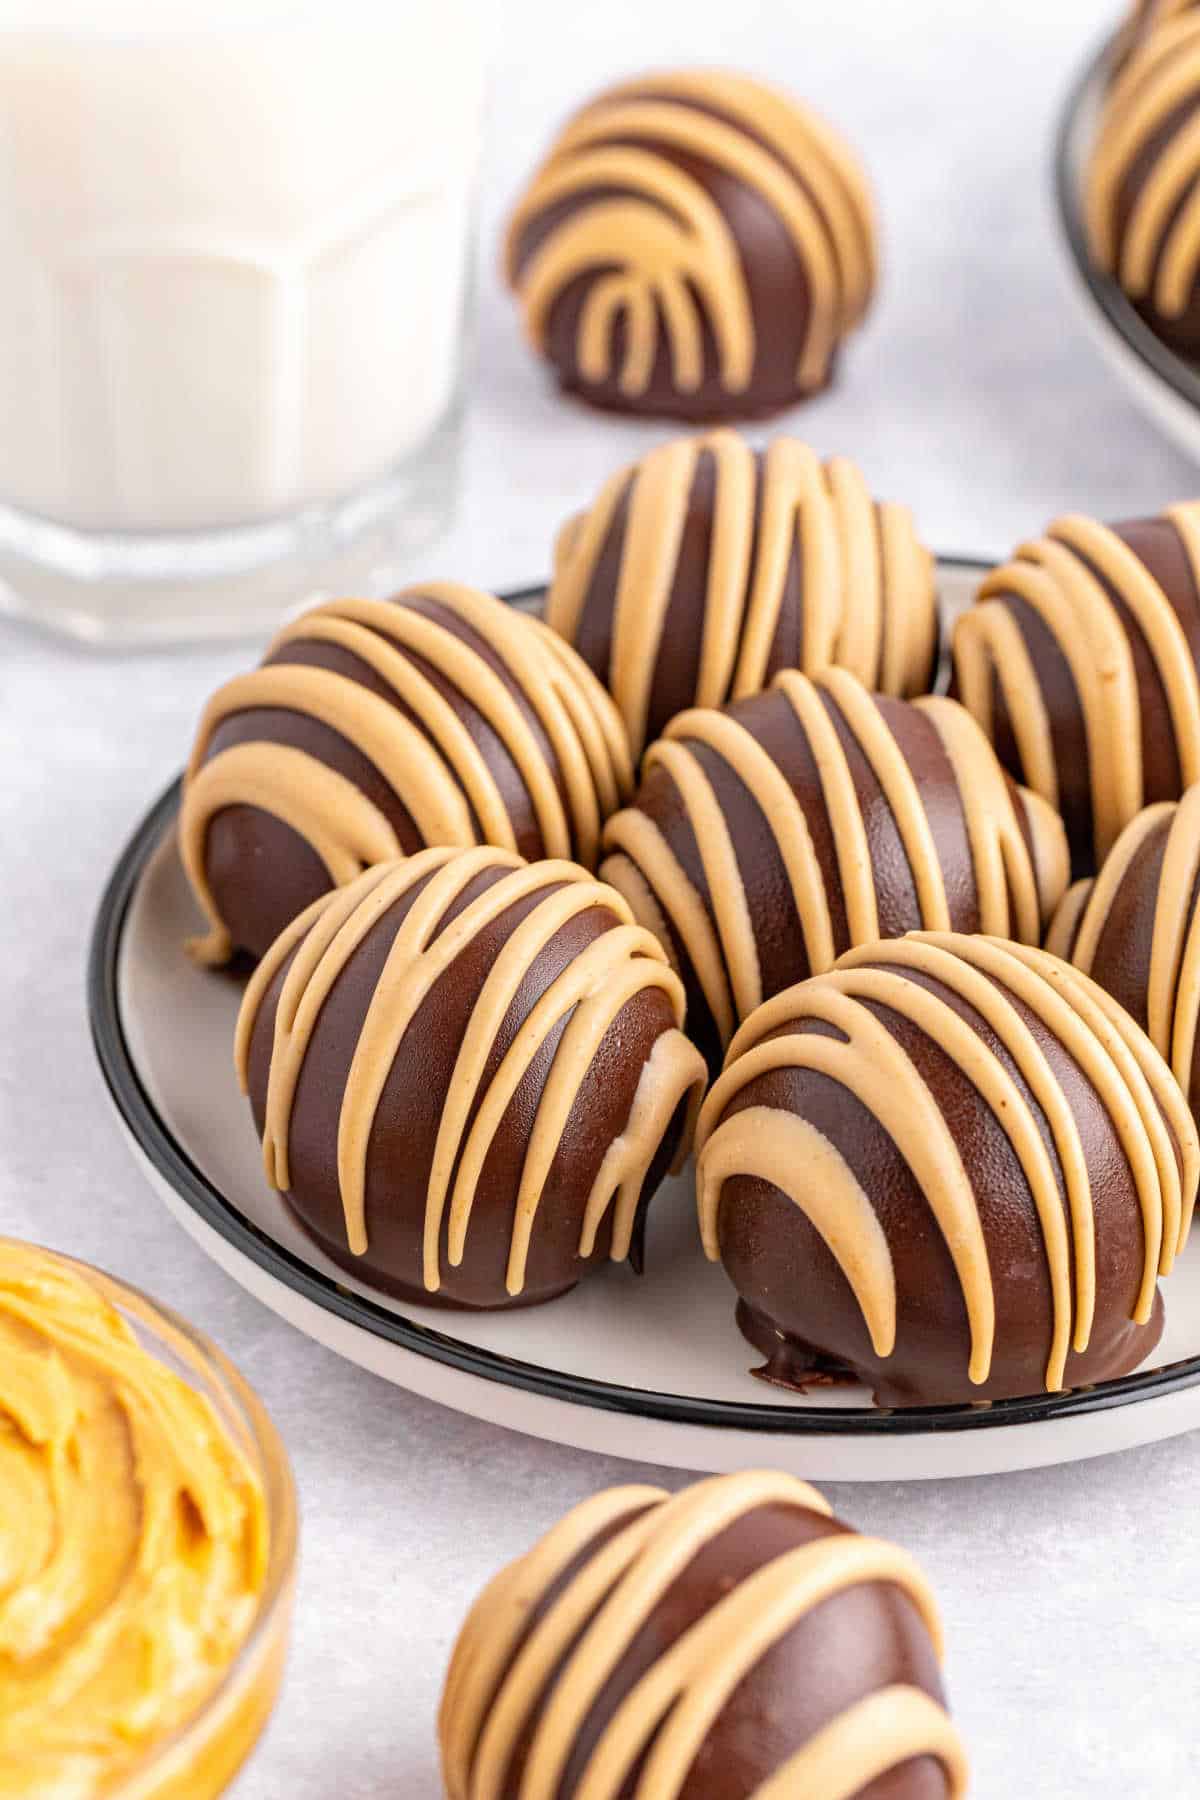 Chocolate covered peanut butter balls on a plate.